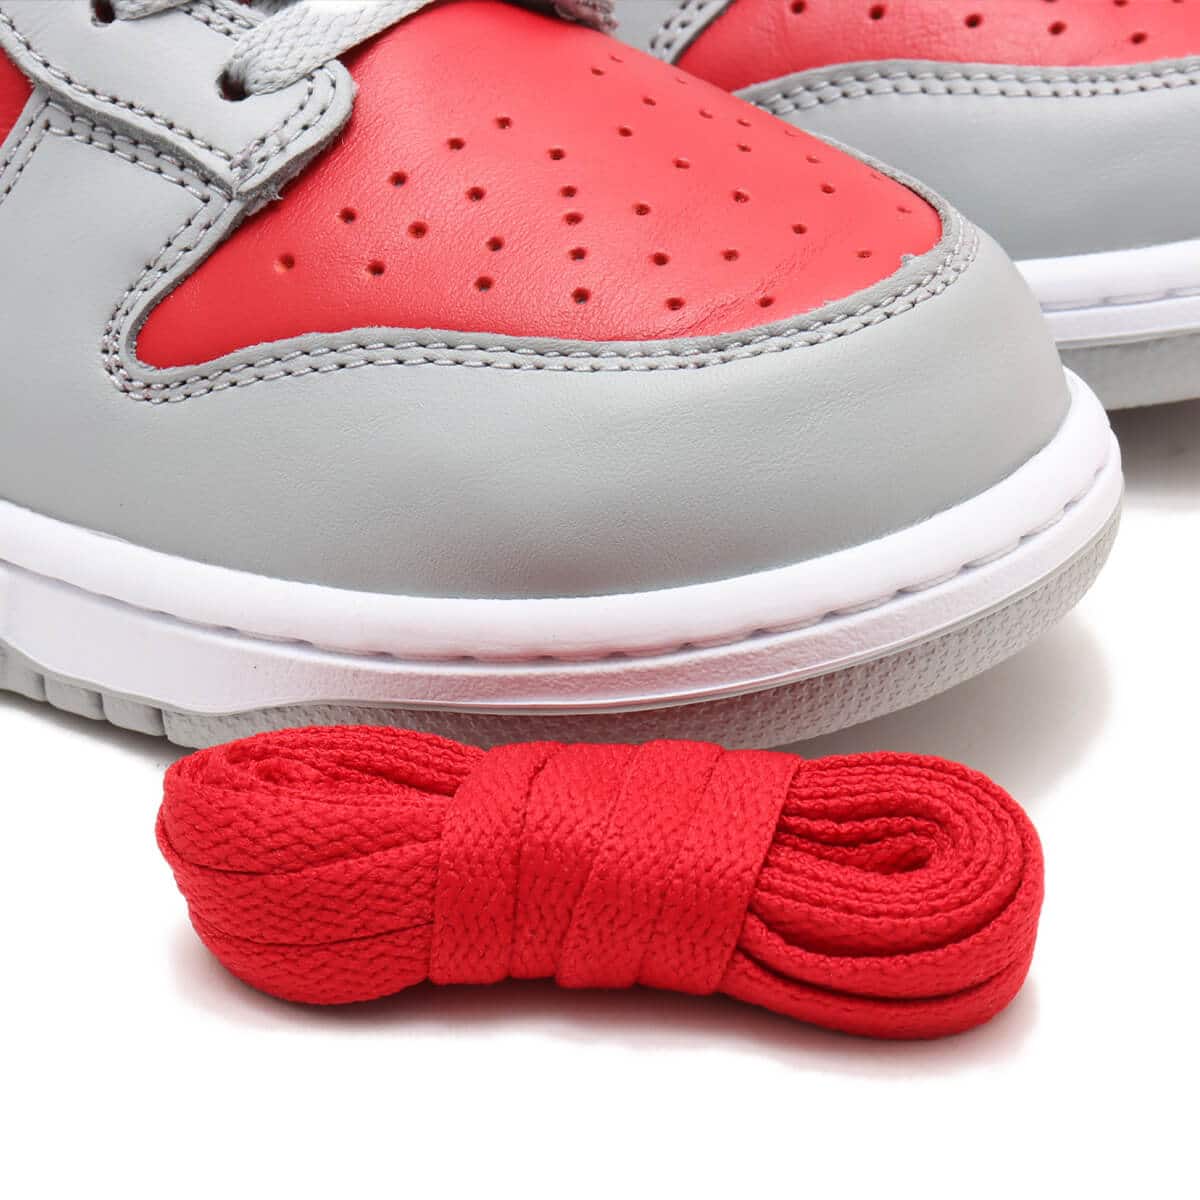 NIKE DUNK LOW QS VARSITY RED/SILVER-WHITE